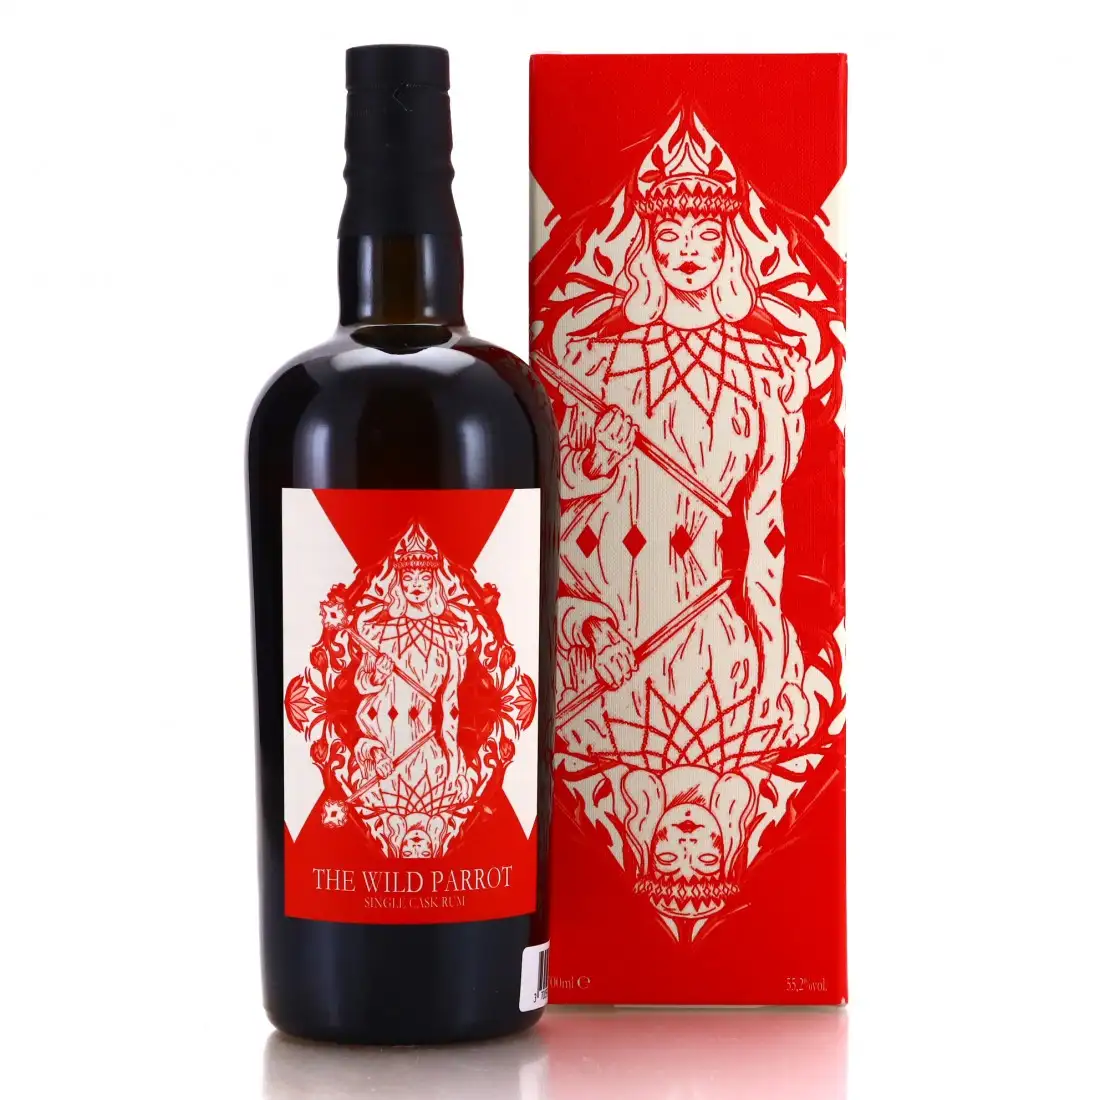 Image of the front of the bottle of the rum Blackjack Series (Fiji)